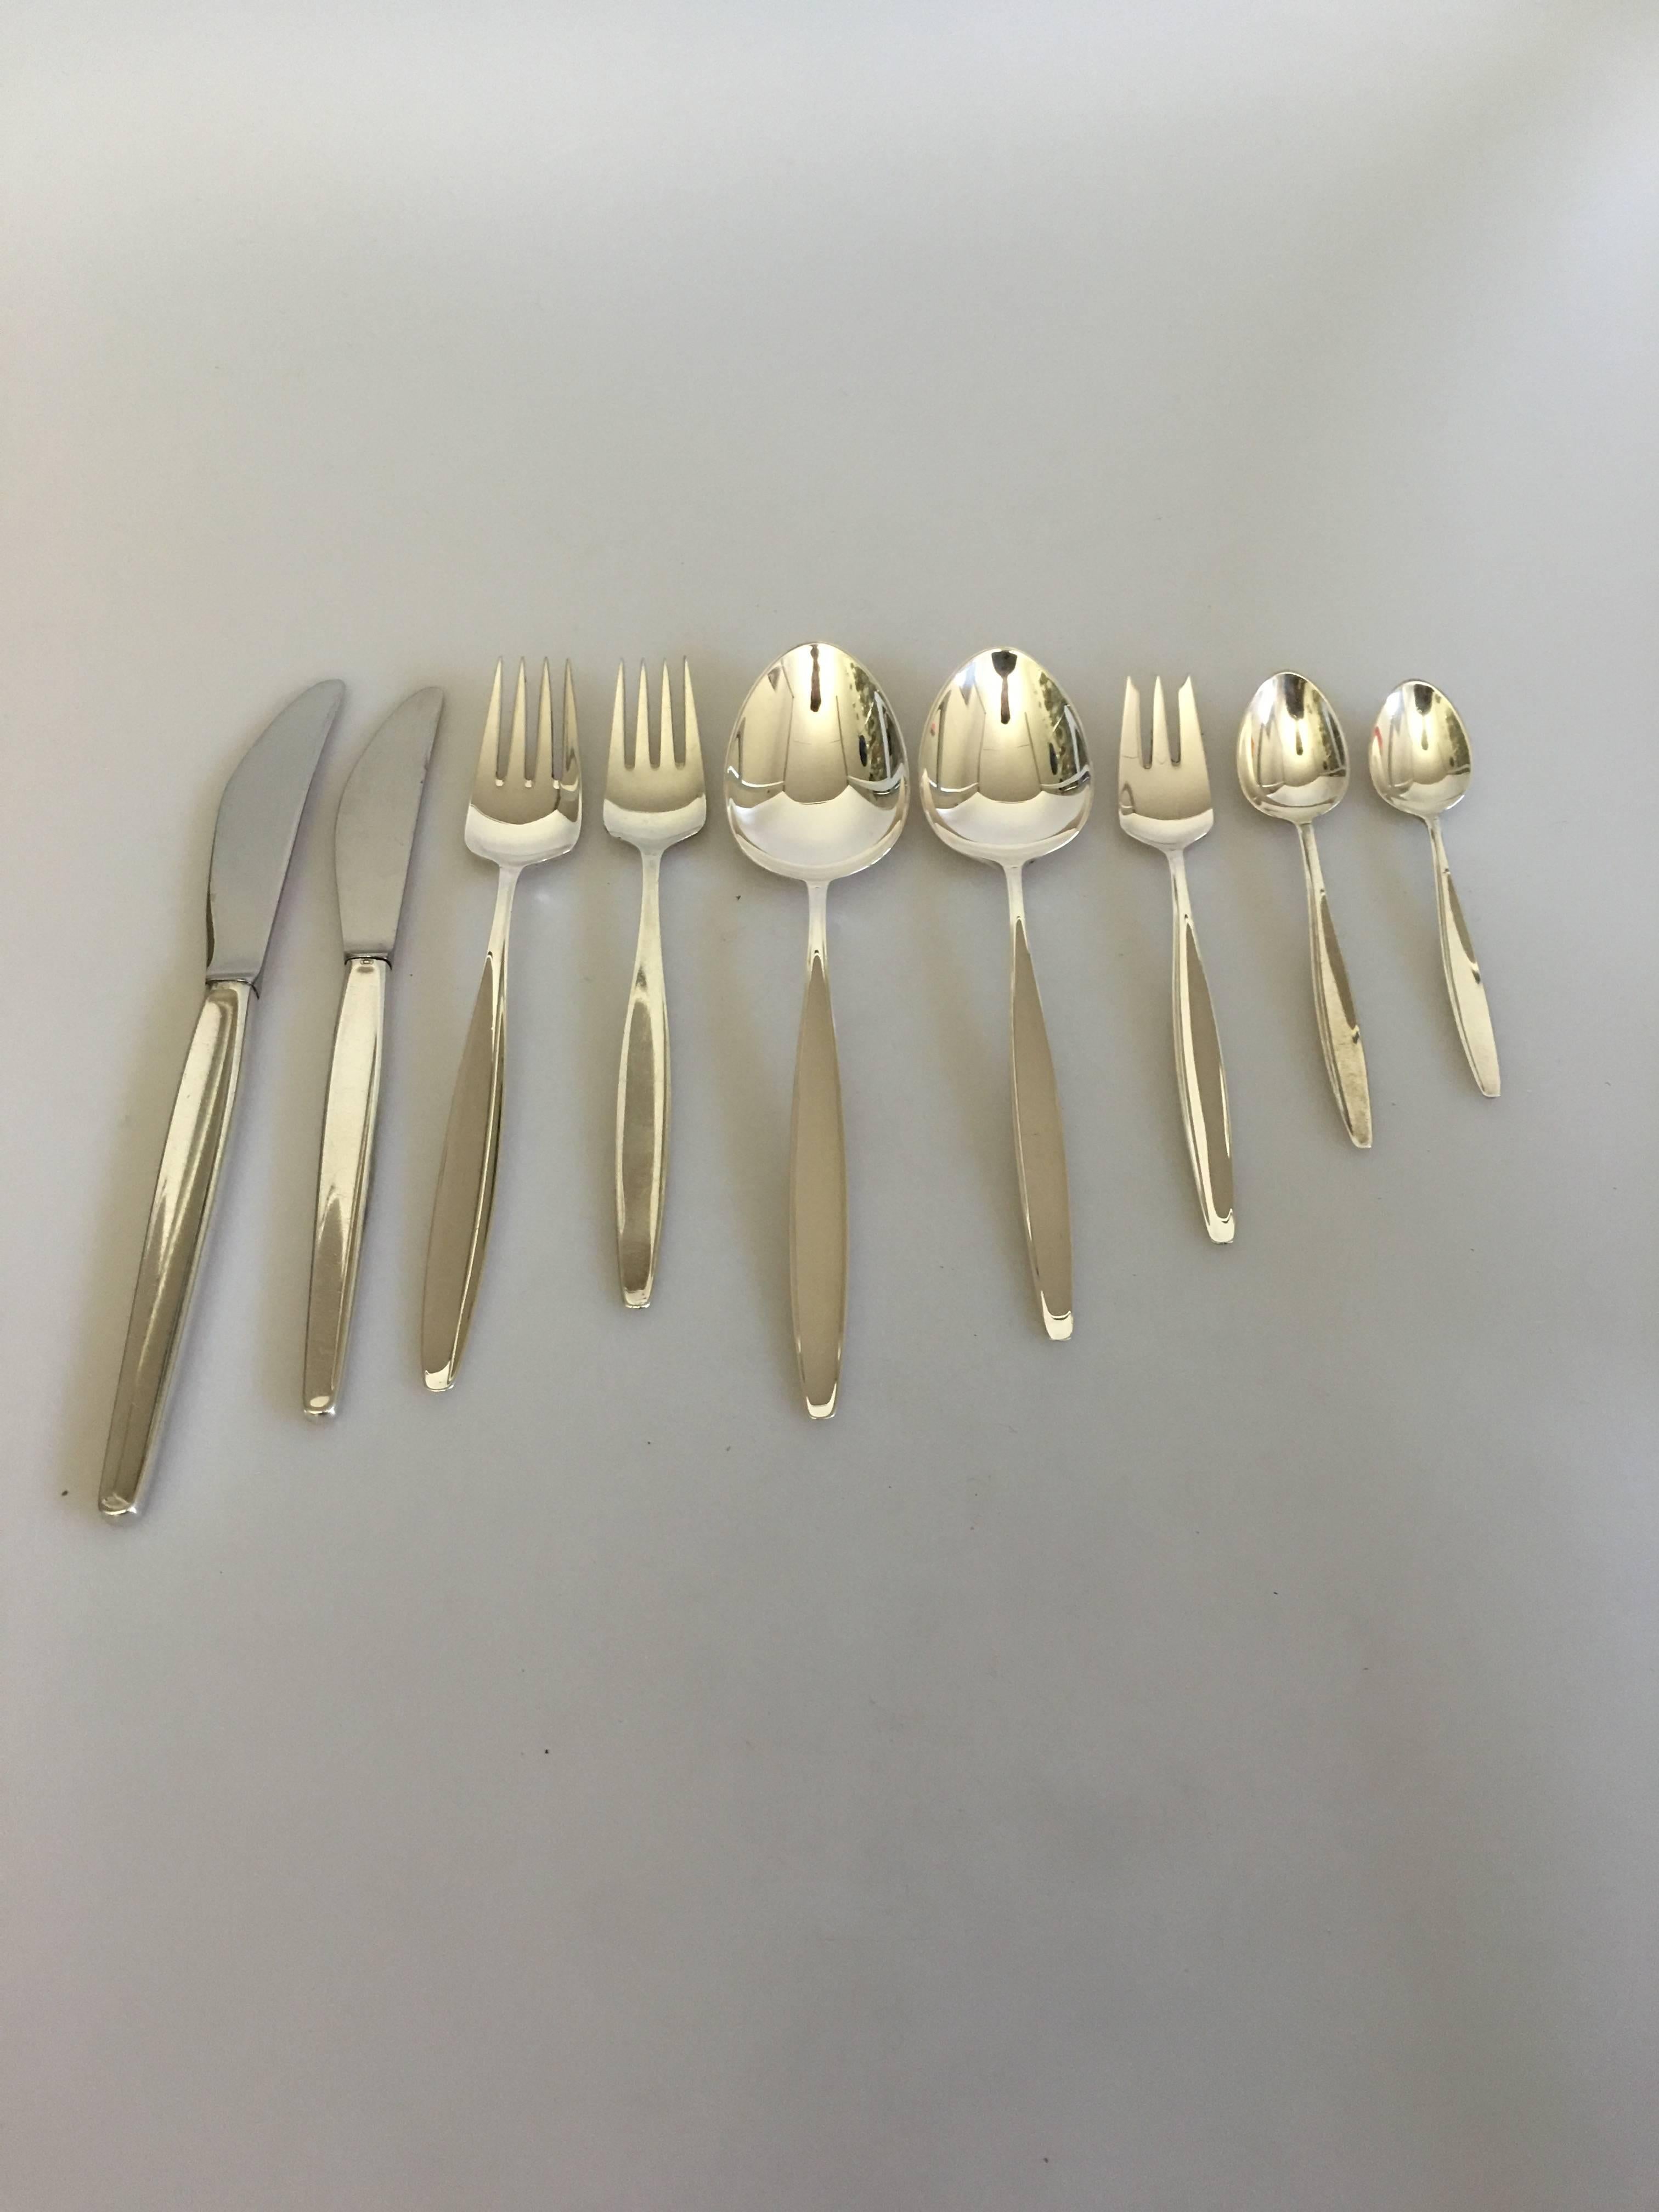 Danish Georg Jensen Sterling Silver 'Cypress' Flatware Set of 108 Pieces for 12 Persons